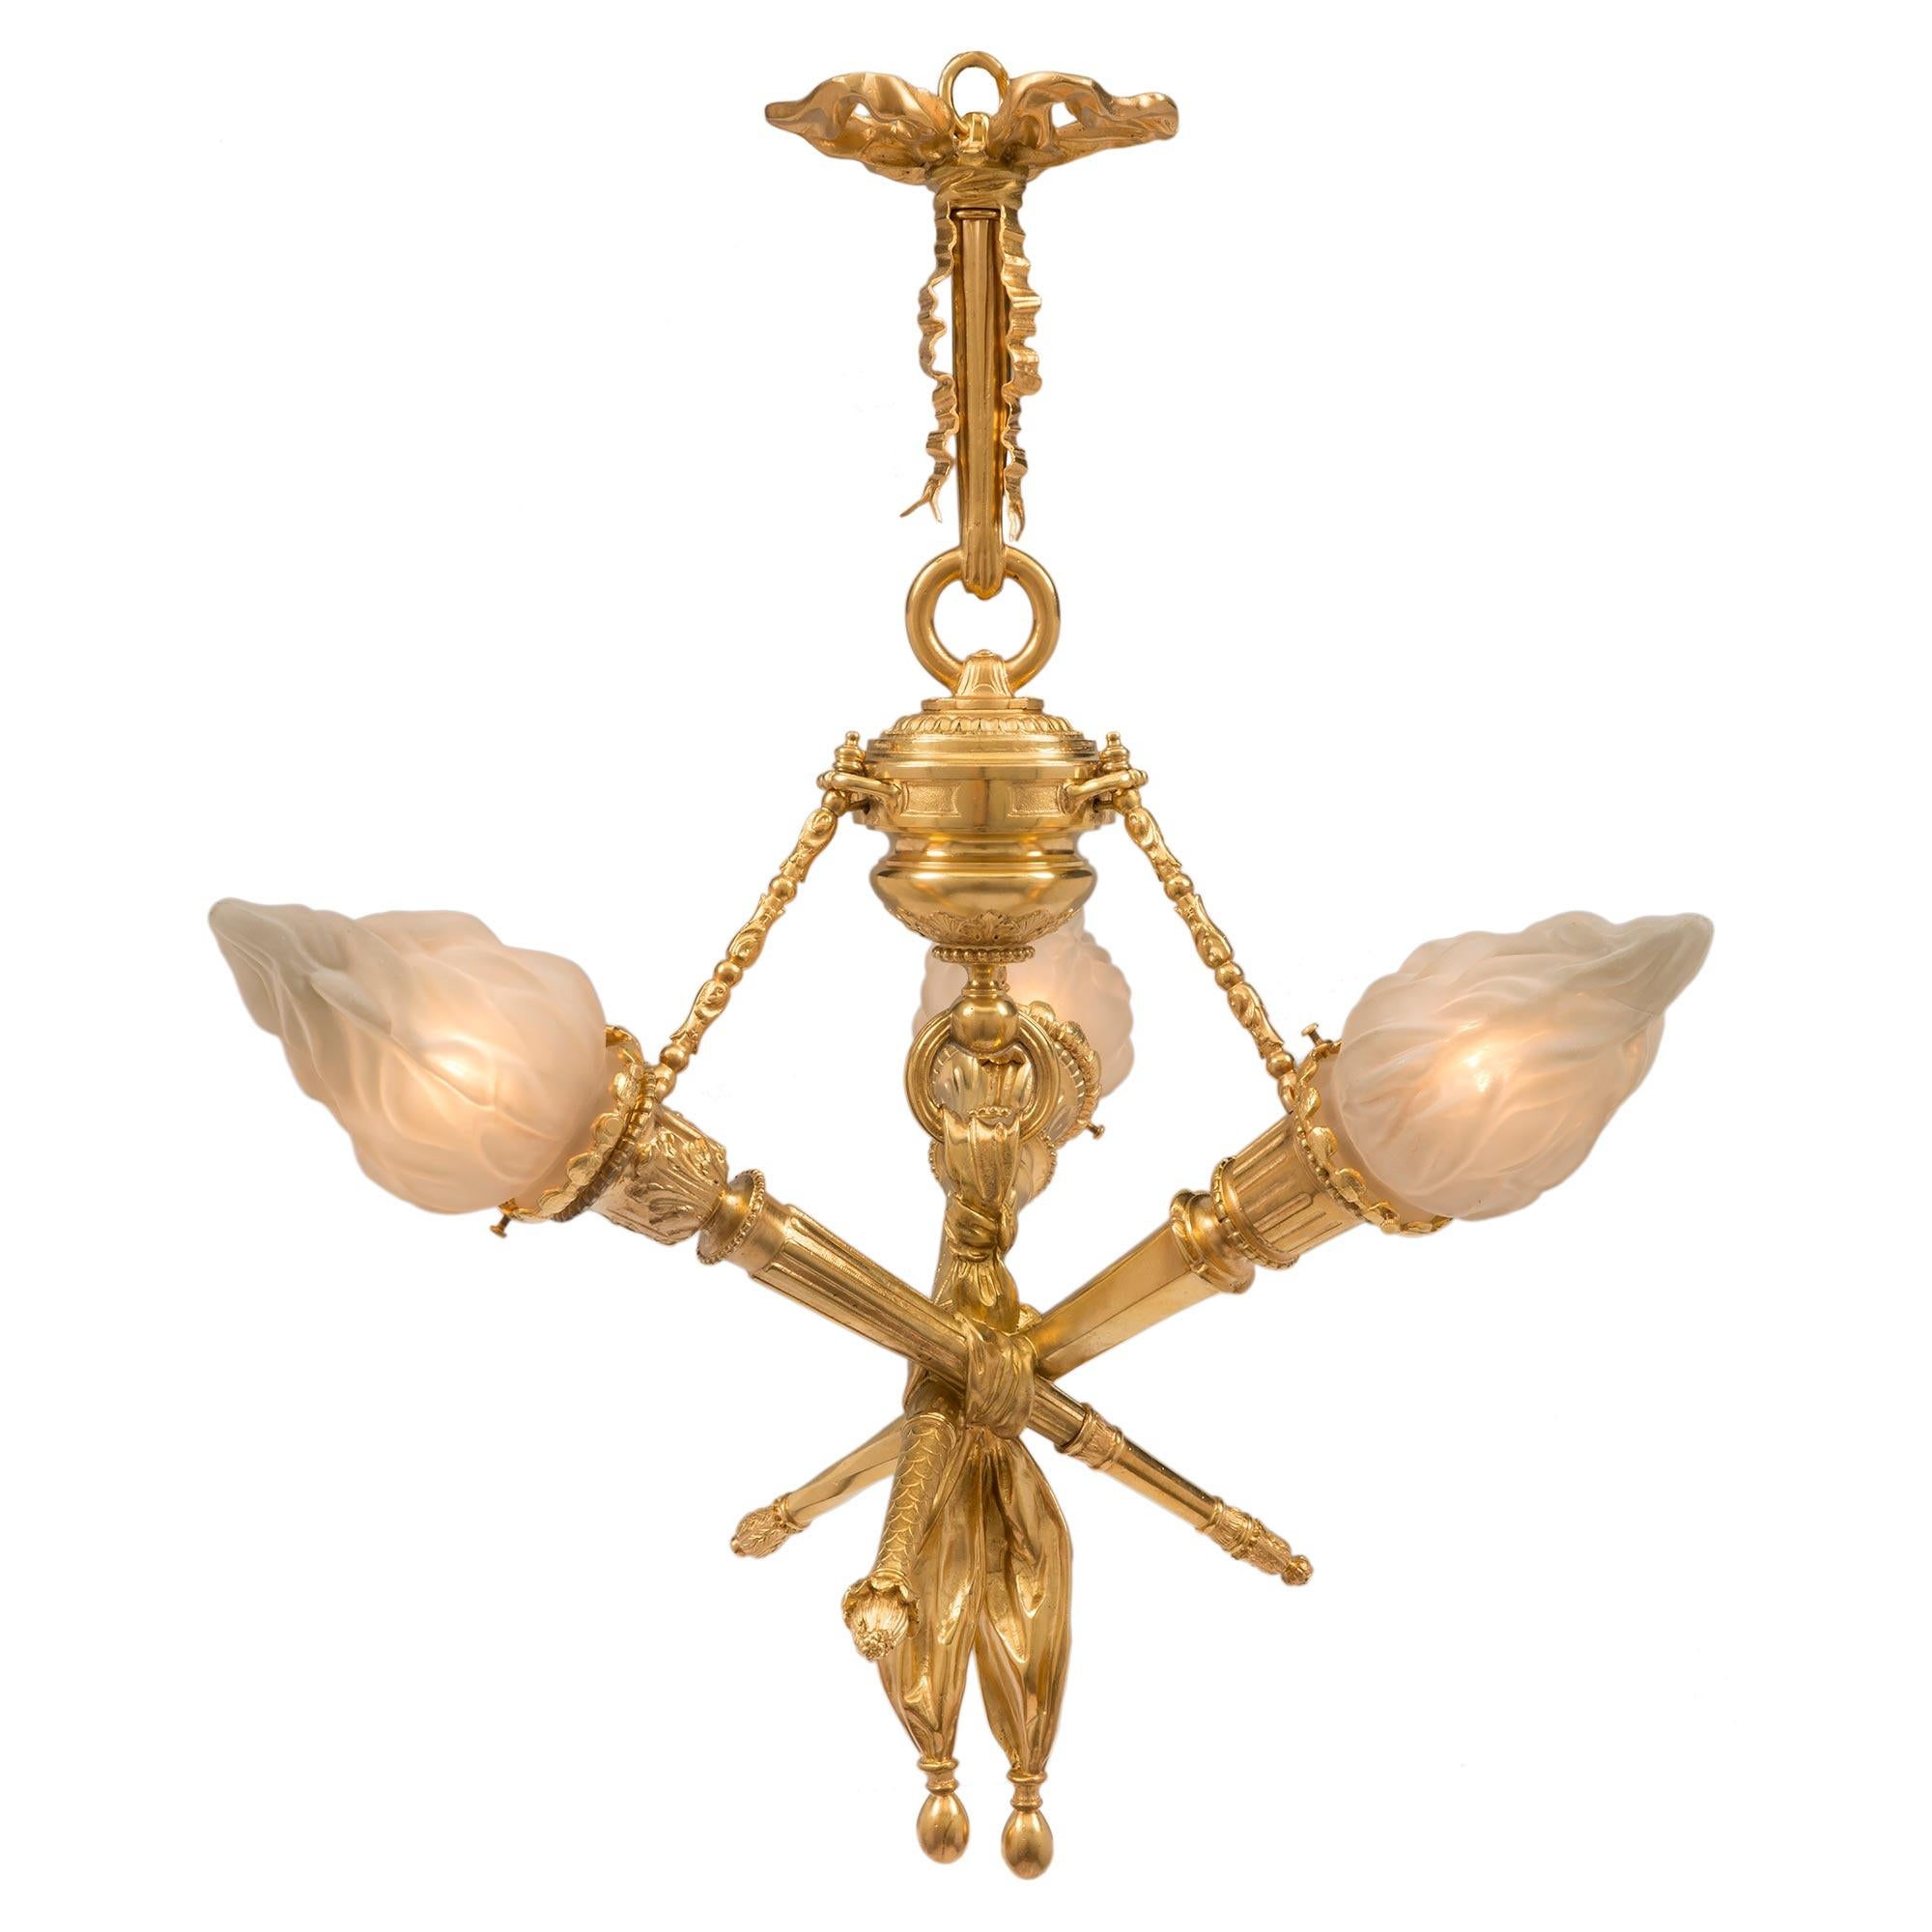 A striking and very unique French 19th century Louis XVI st. ormolu and frosted glass three light chandelier. At the center are three statement making ormolu torches which are bound together by a wonderfully executed tied flowing fabric. Each torch